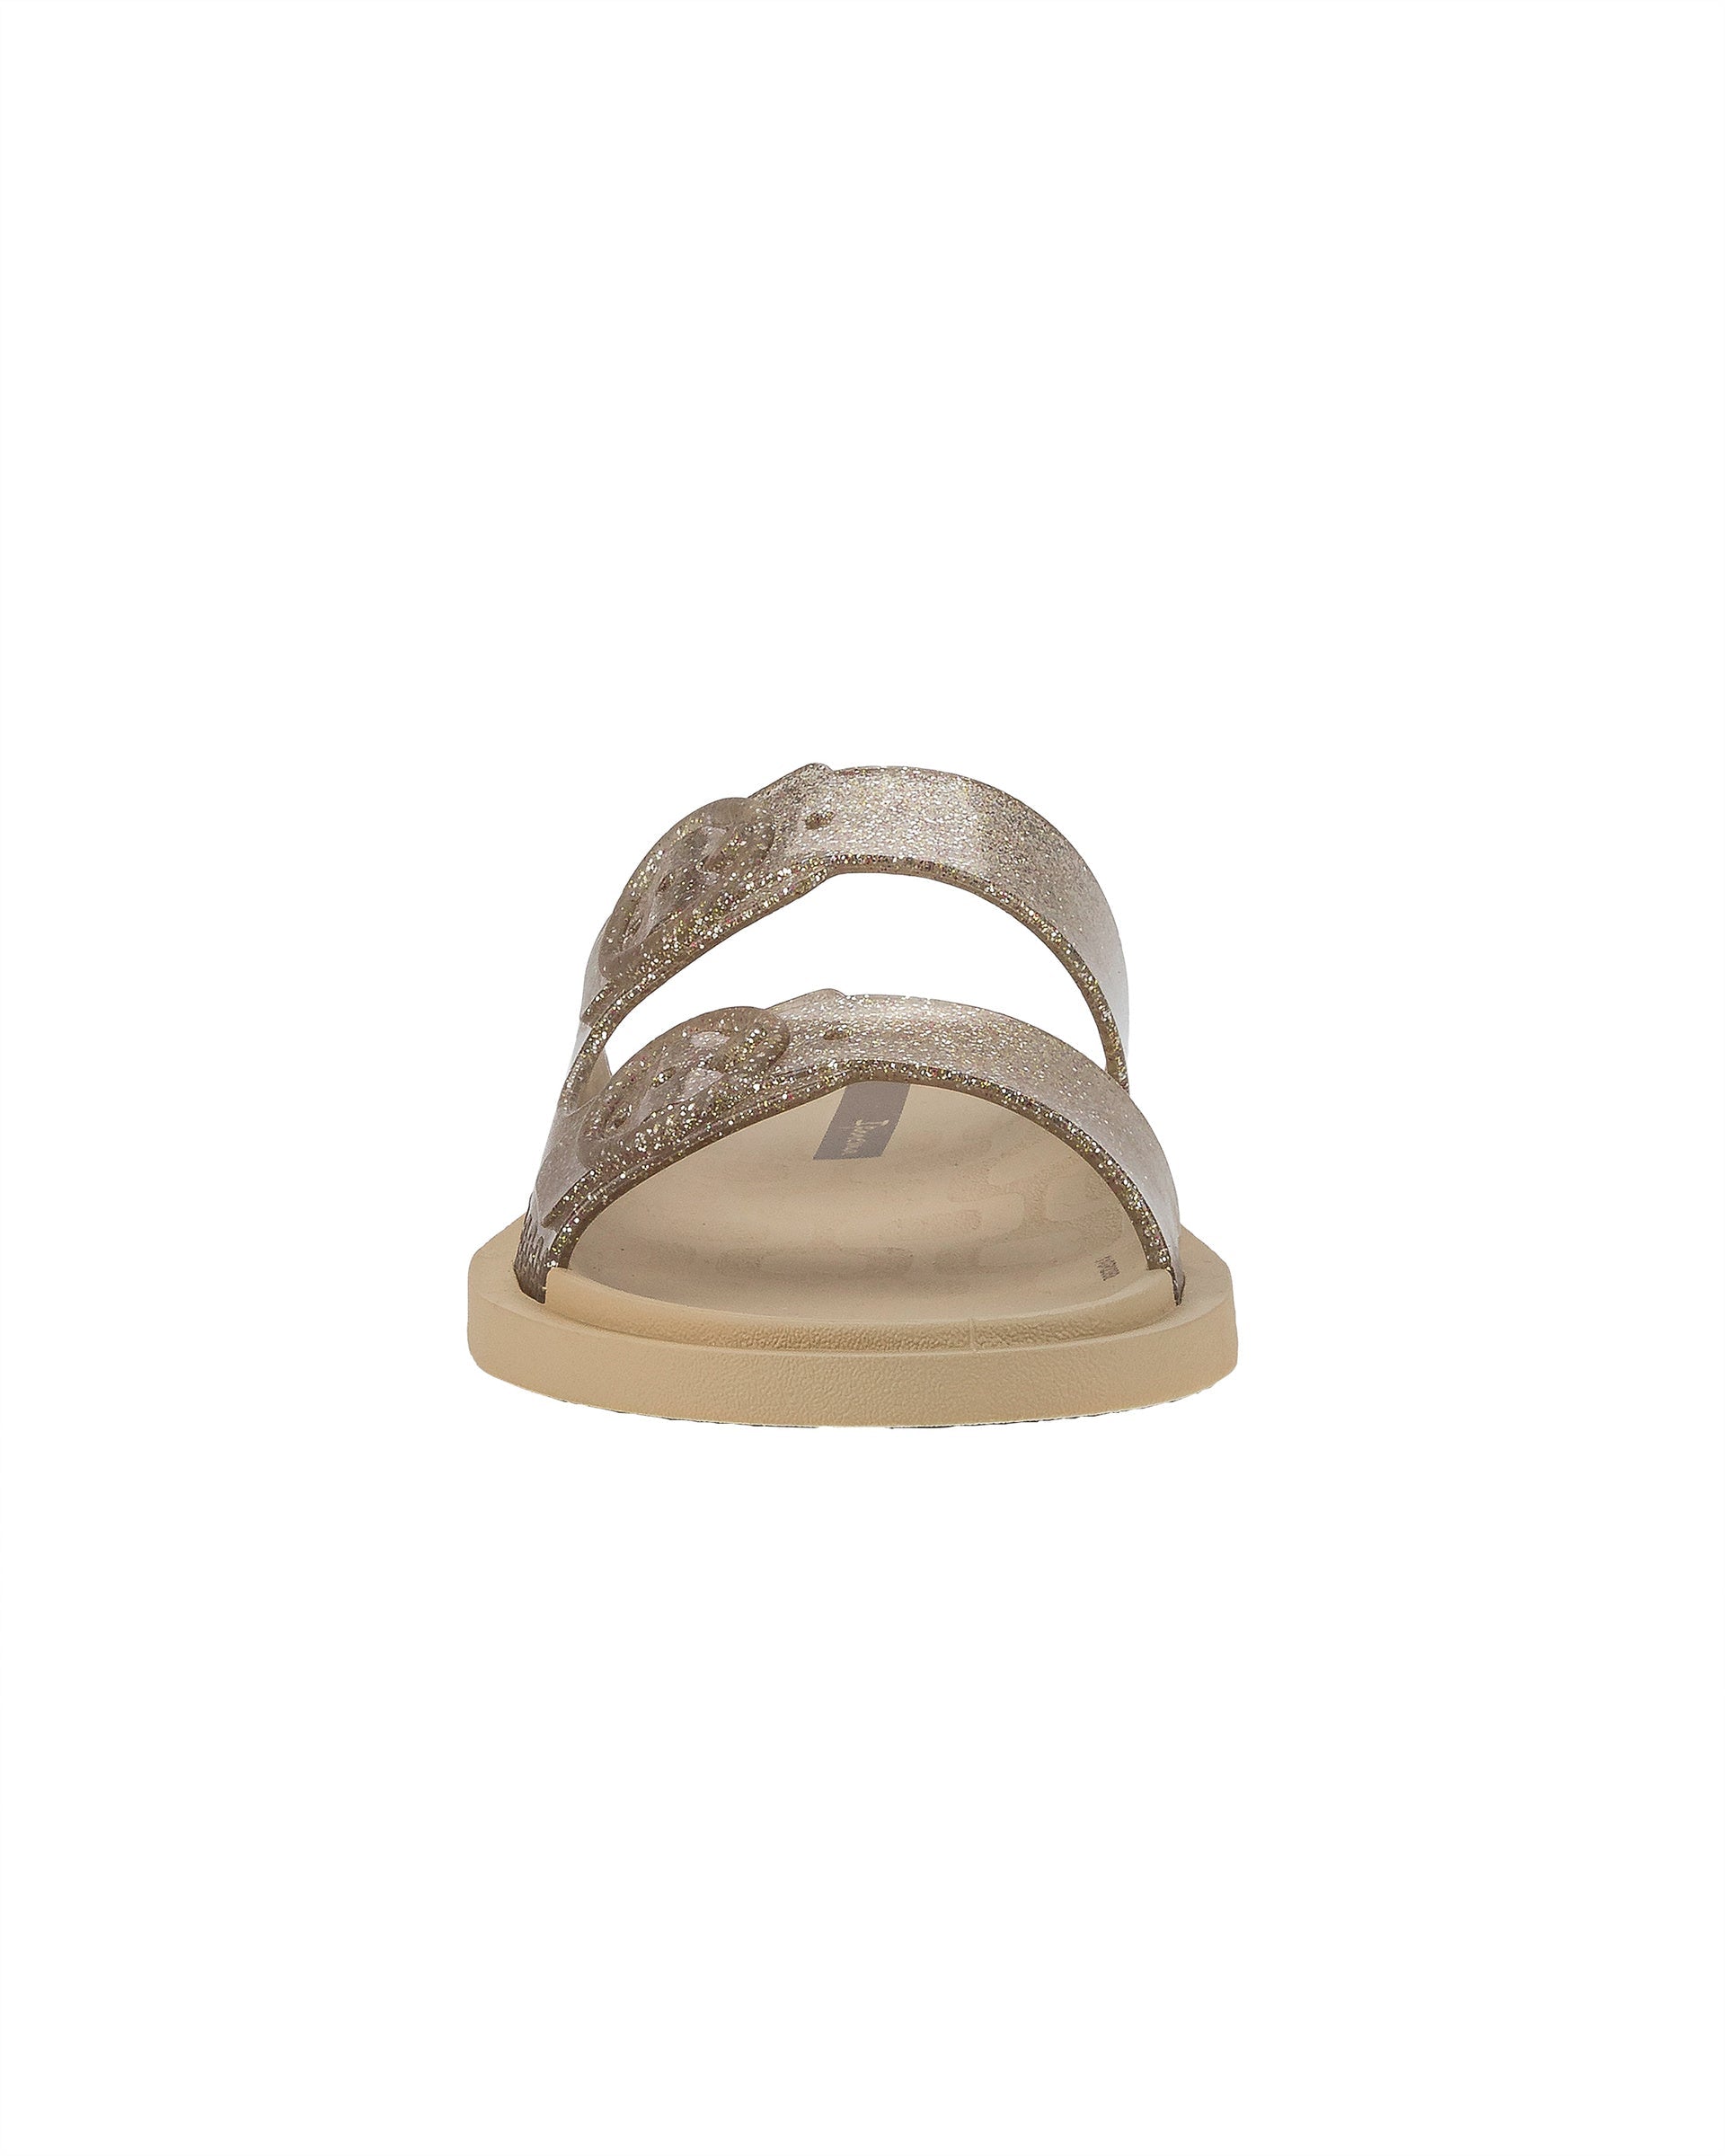 Front view of a beige Ipanema Follow kids slide with a glitter upper.